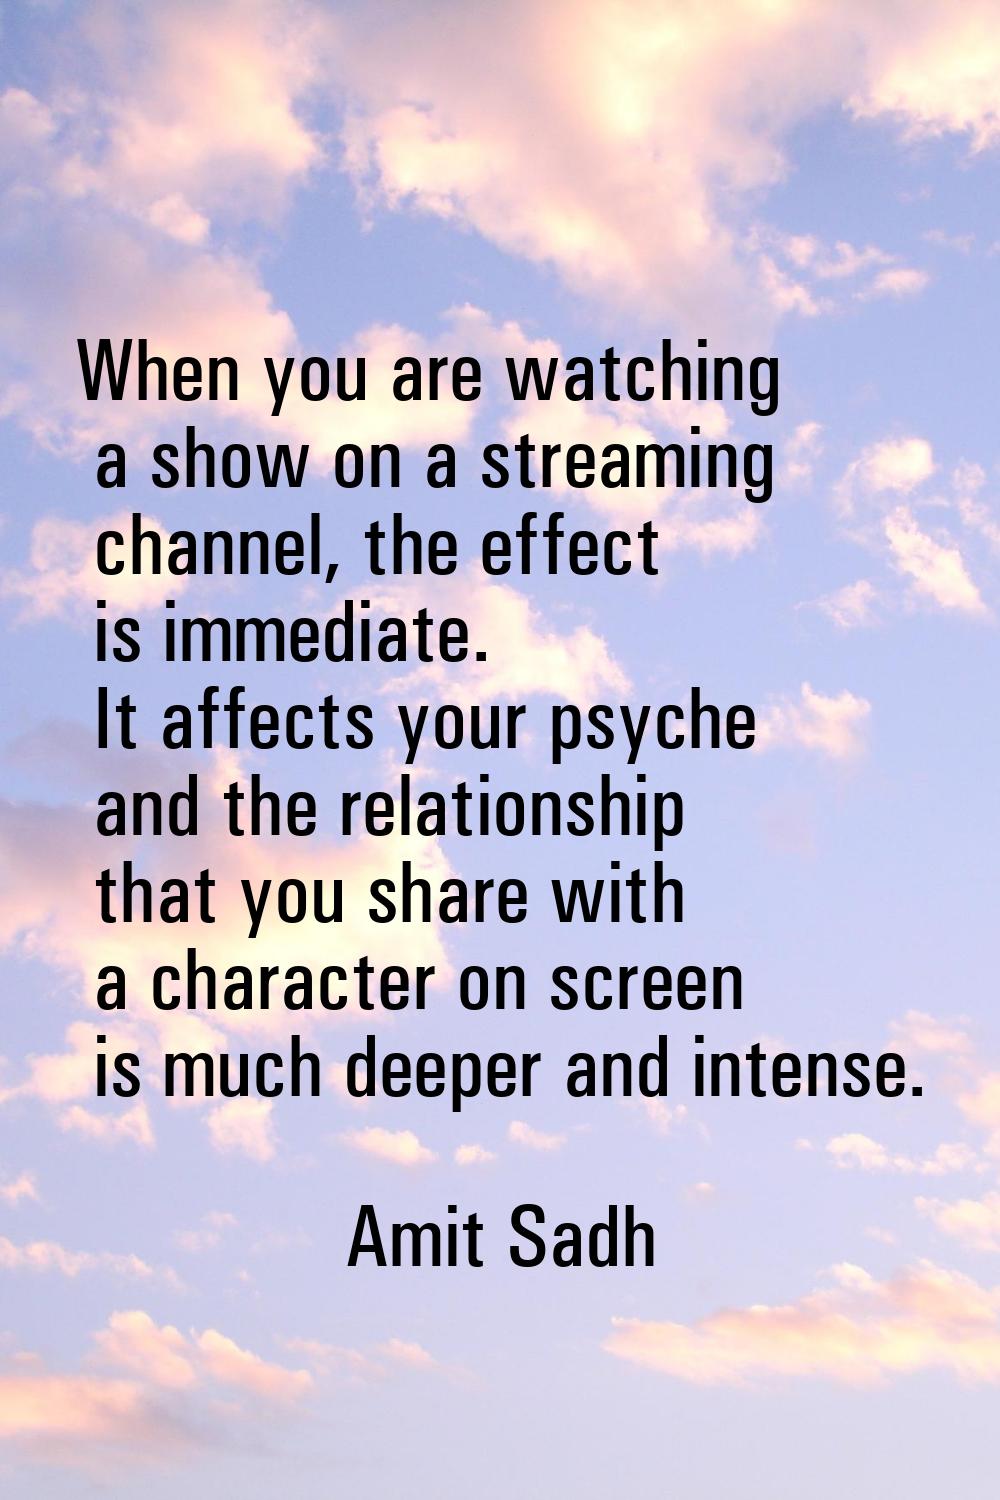 When you are watching a show on a streaming channel, the effect is immediate. It affects your psych